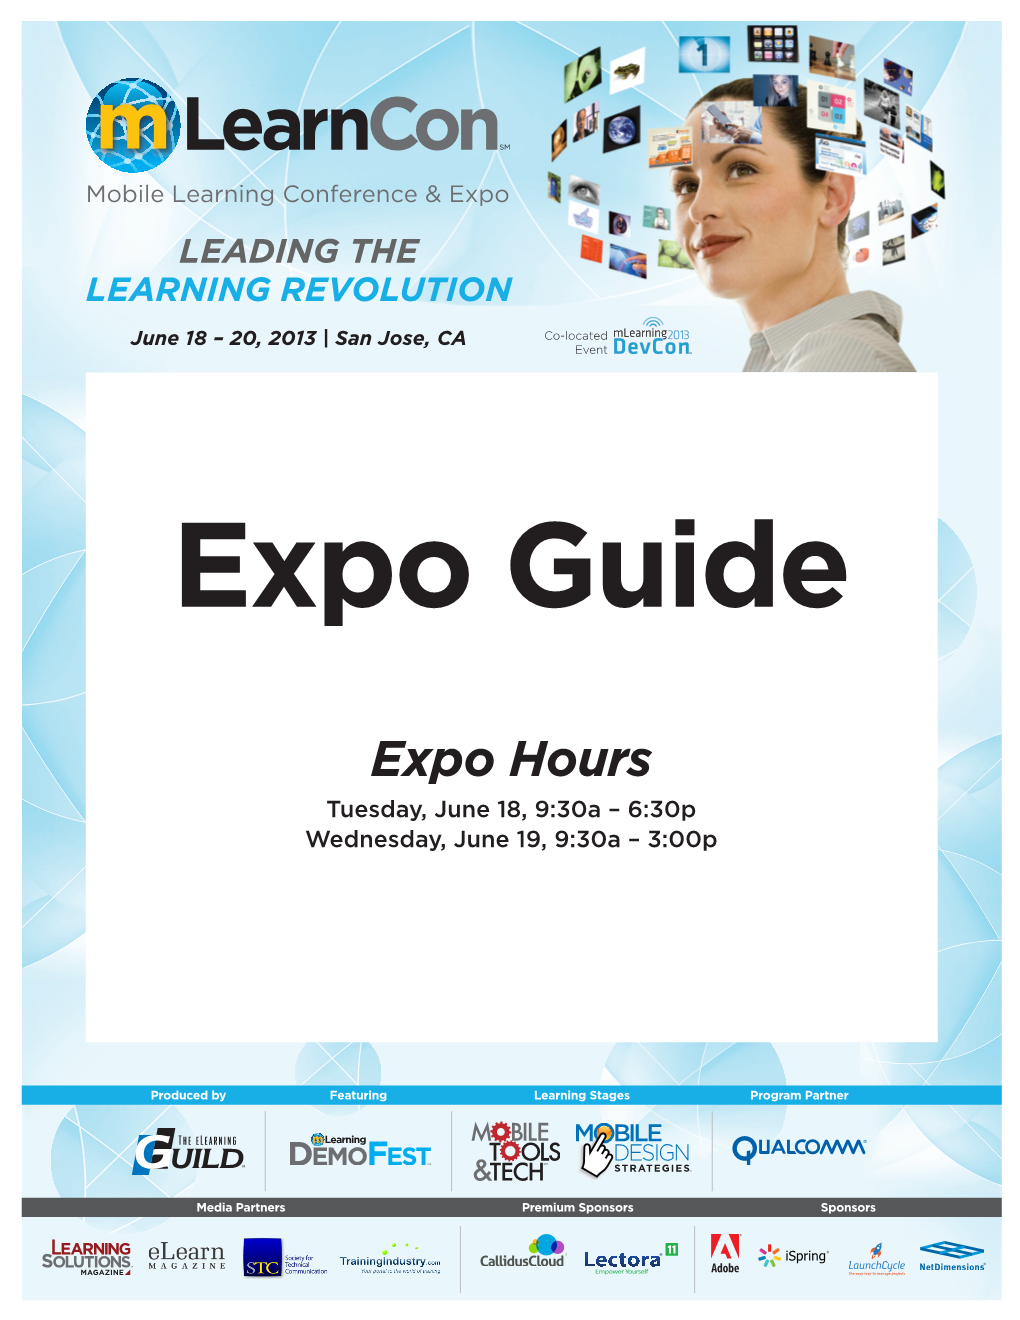 Expo Hours Tuesday, June 18, 9:30A – 6:30P Wednesday, June 19, 9:30A – 3:00P